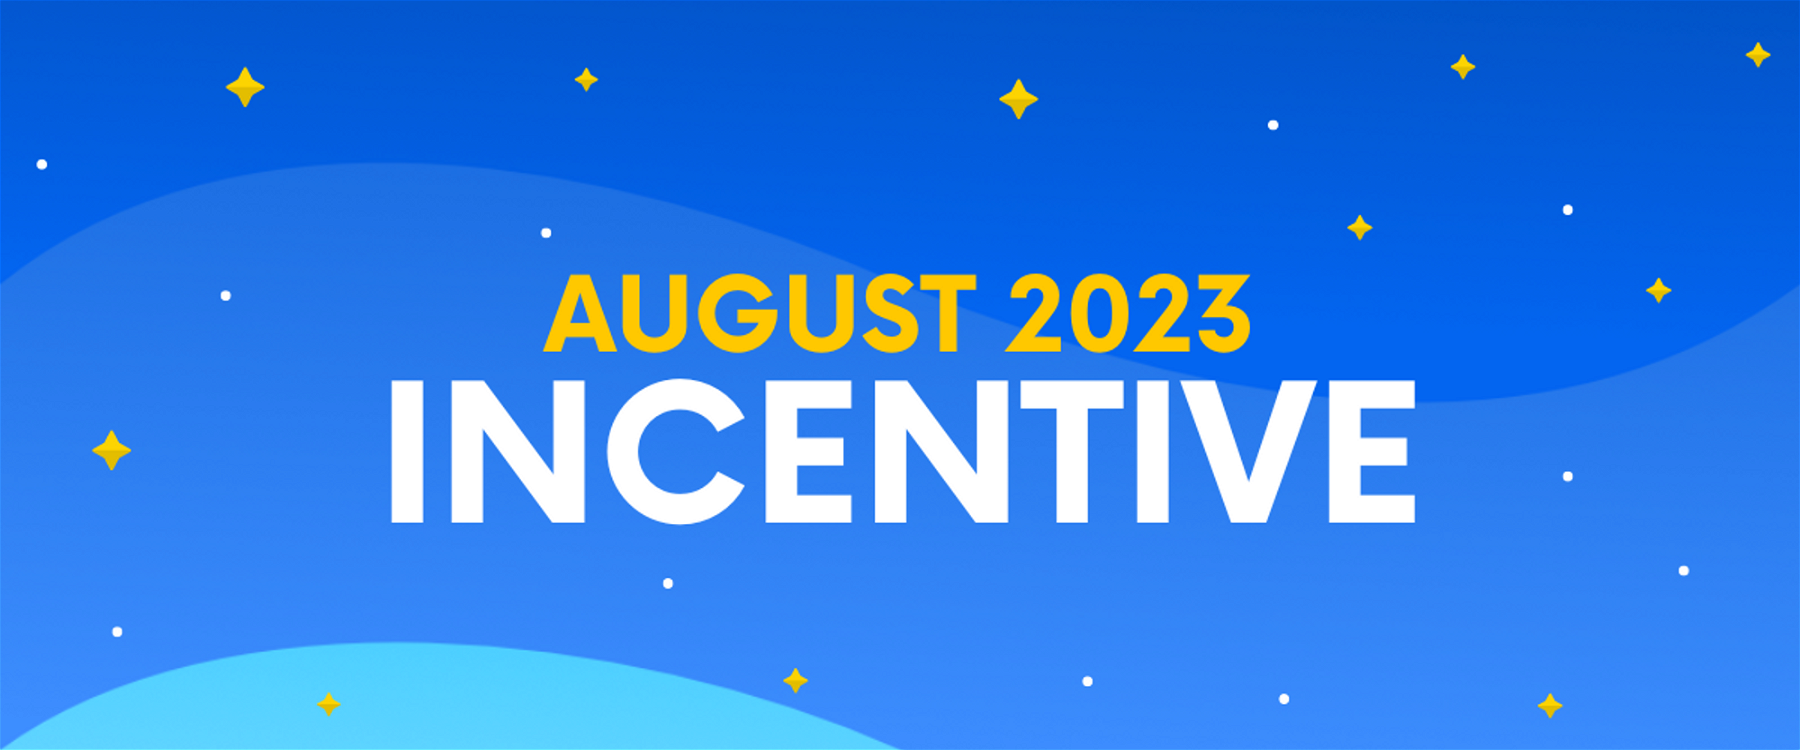 August 2023 Incentive